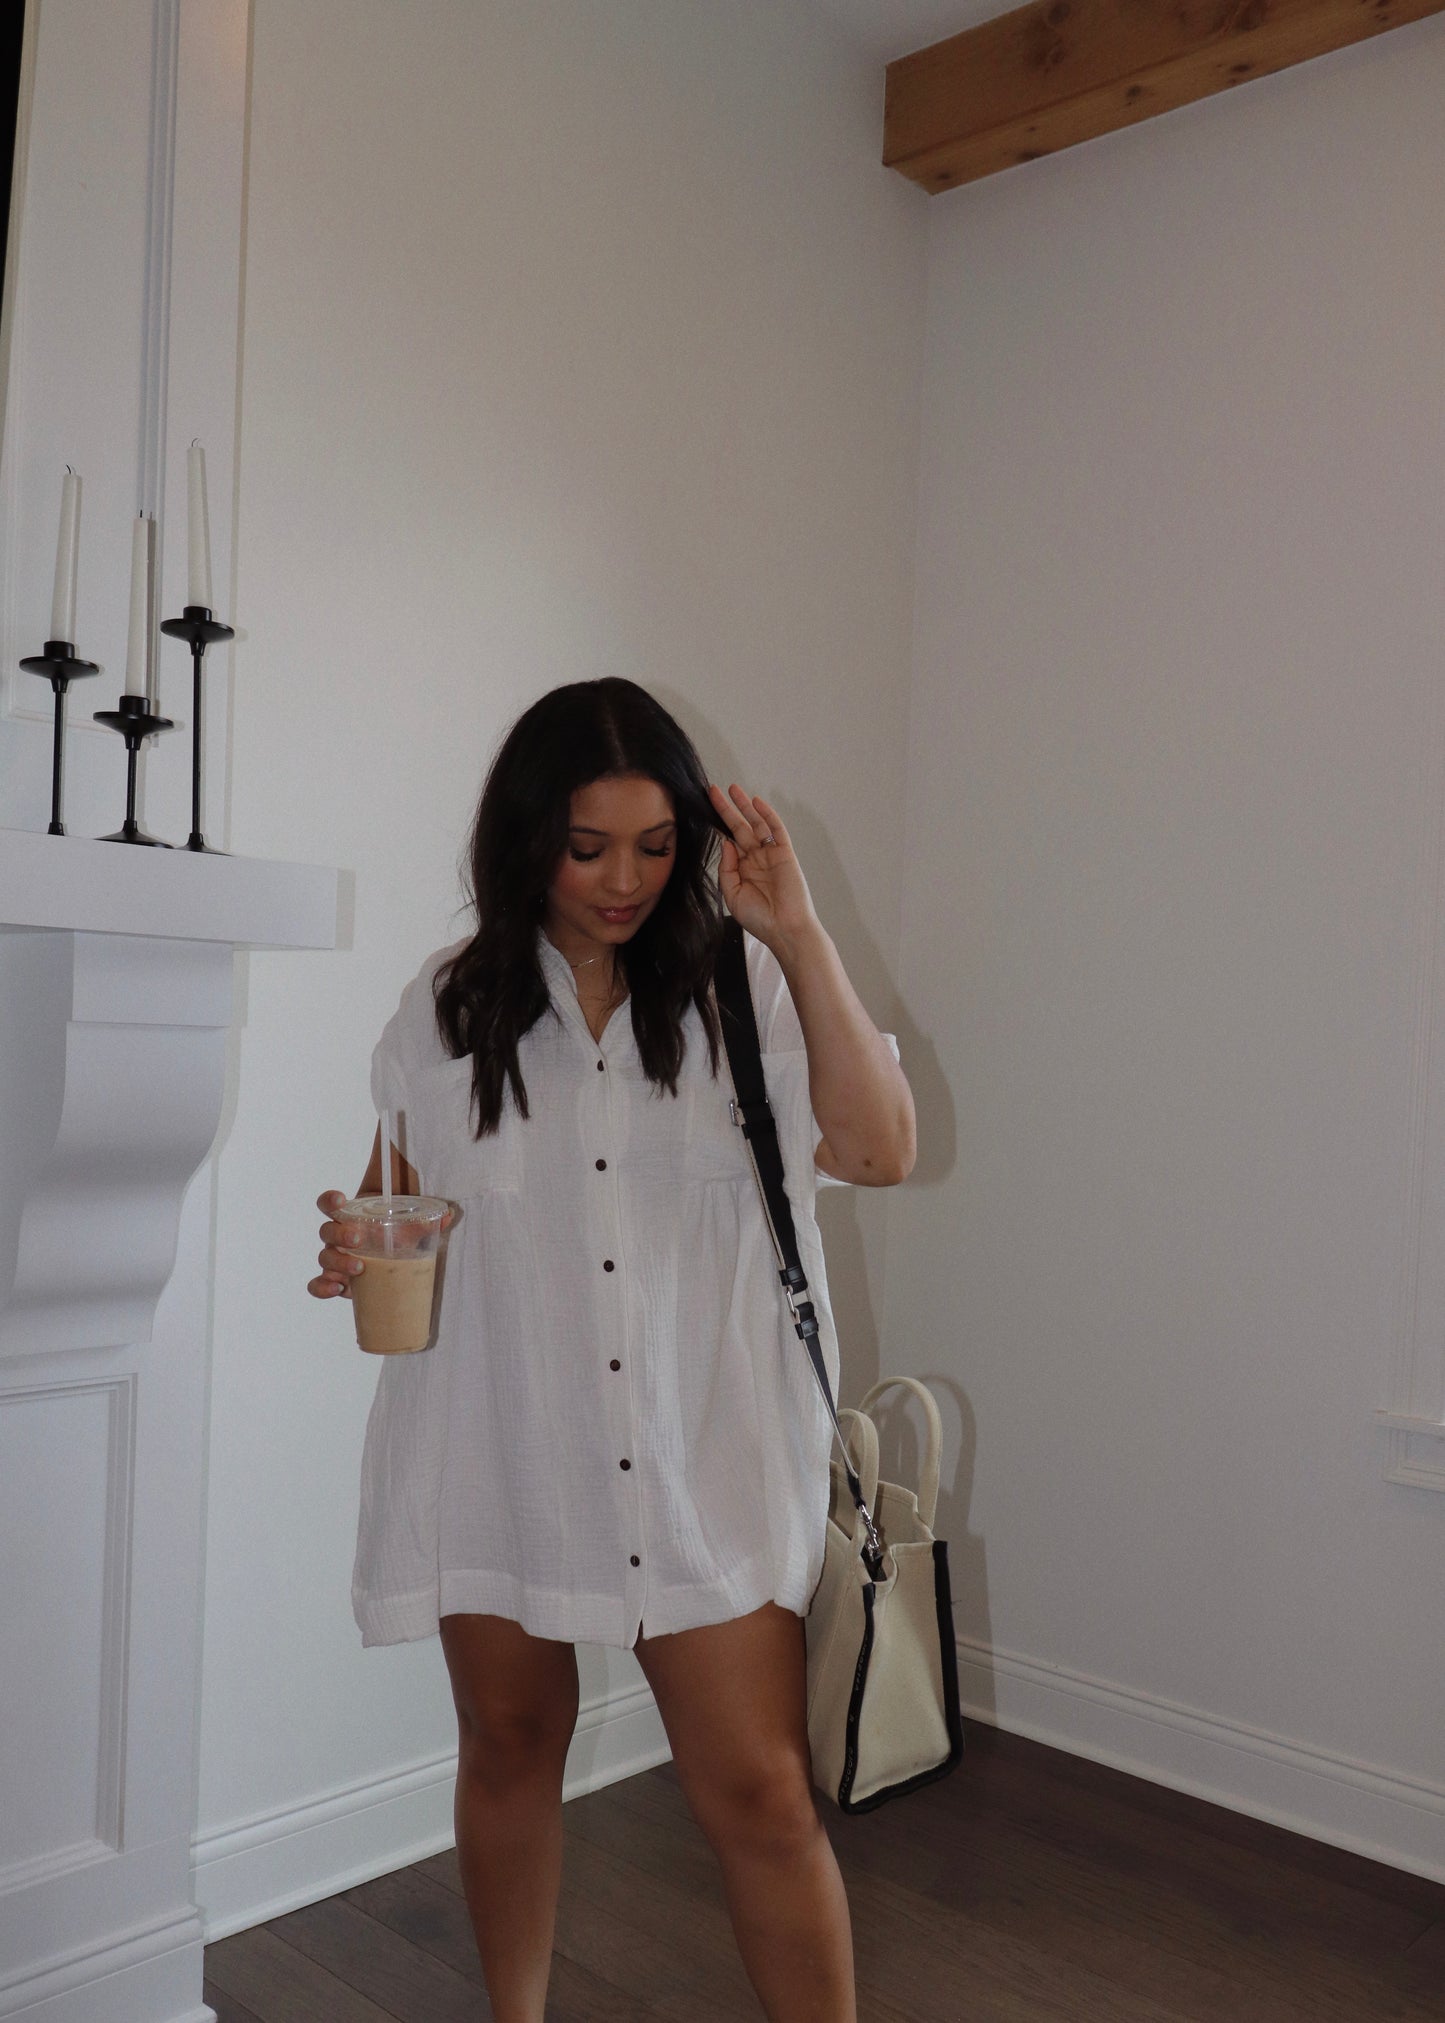 Time For Vacay Shirt Dress - OFF WHITE